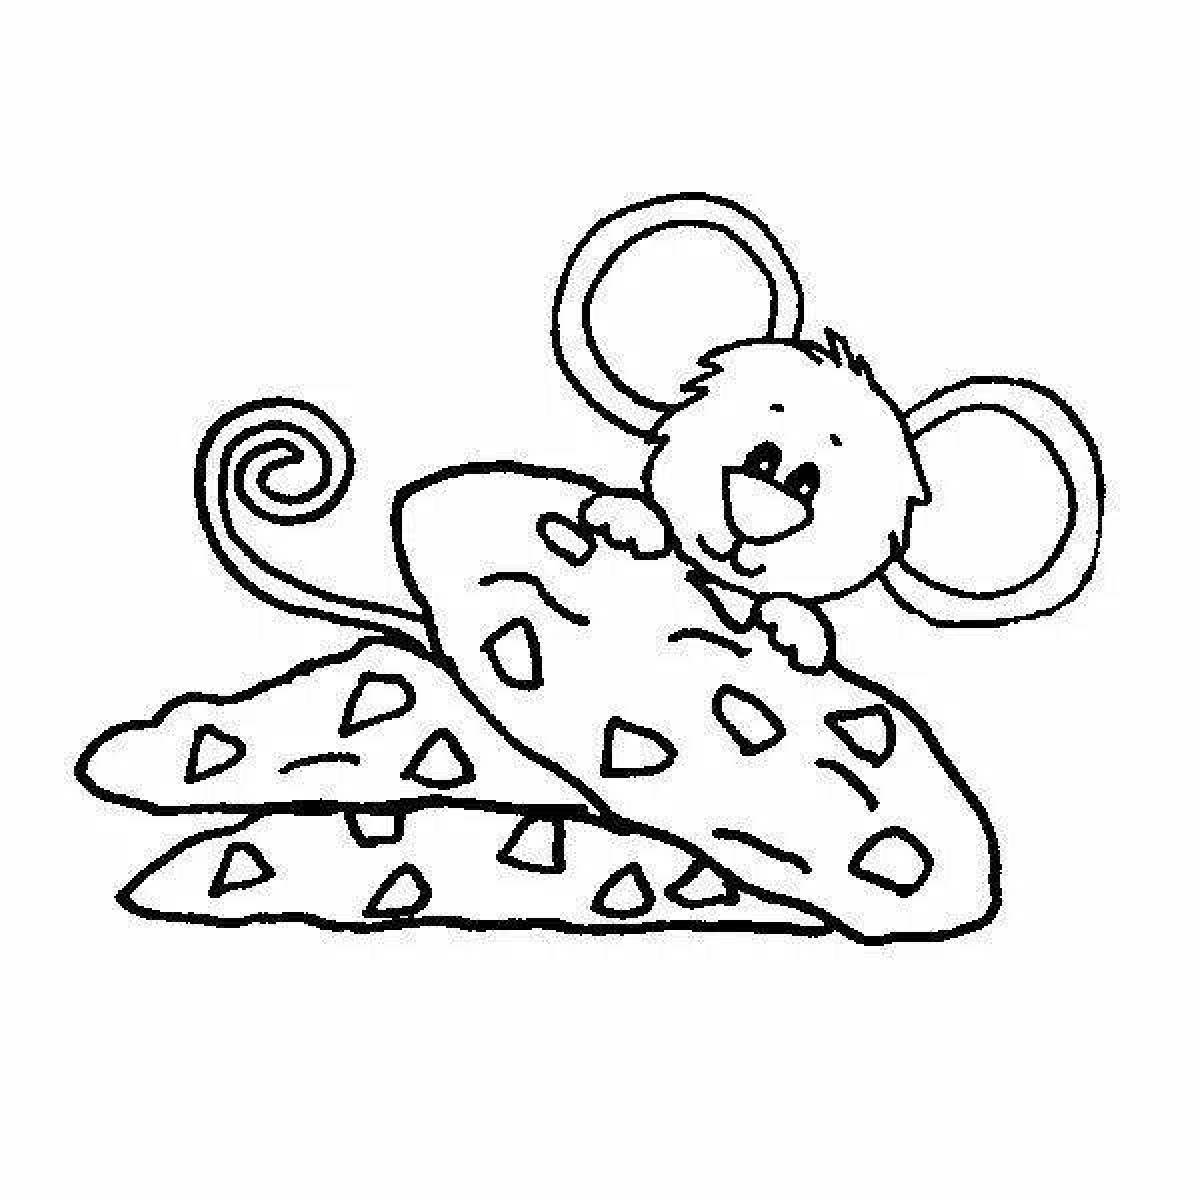 Glamorous mouse sausage coloring page